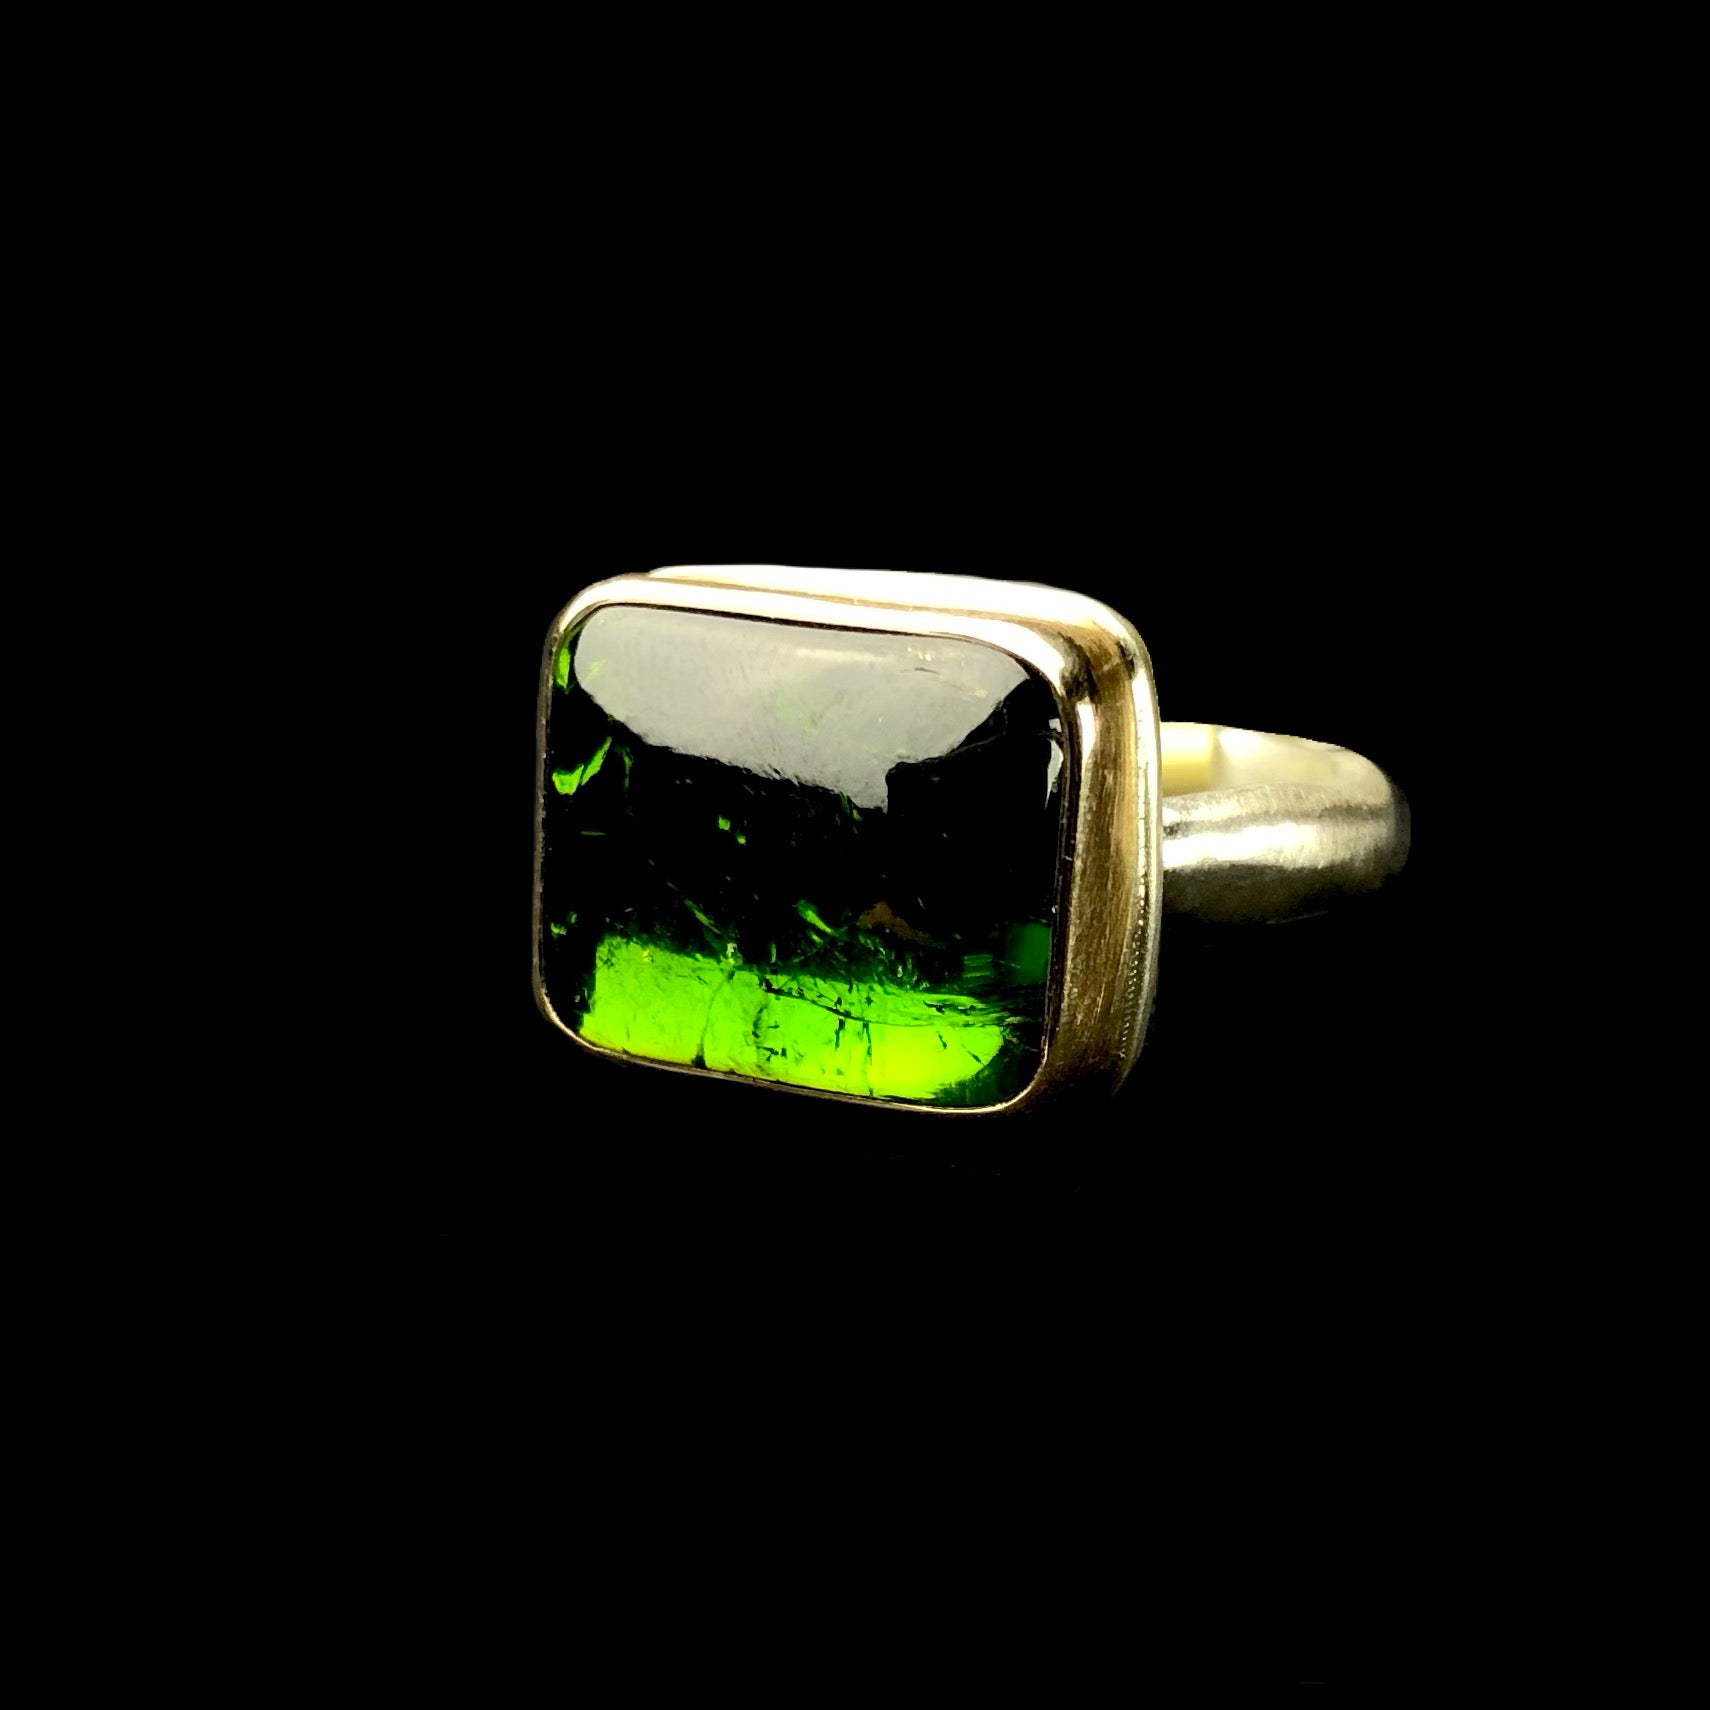 Front side view of smooth, rectangular shaped Green Tourmaline ring